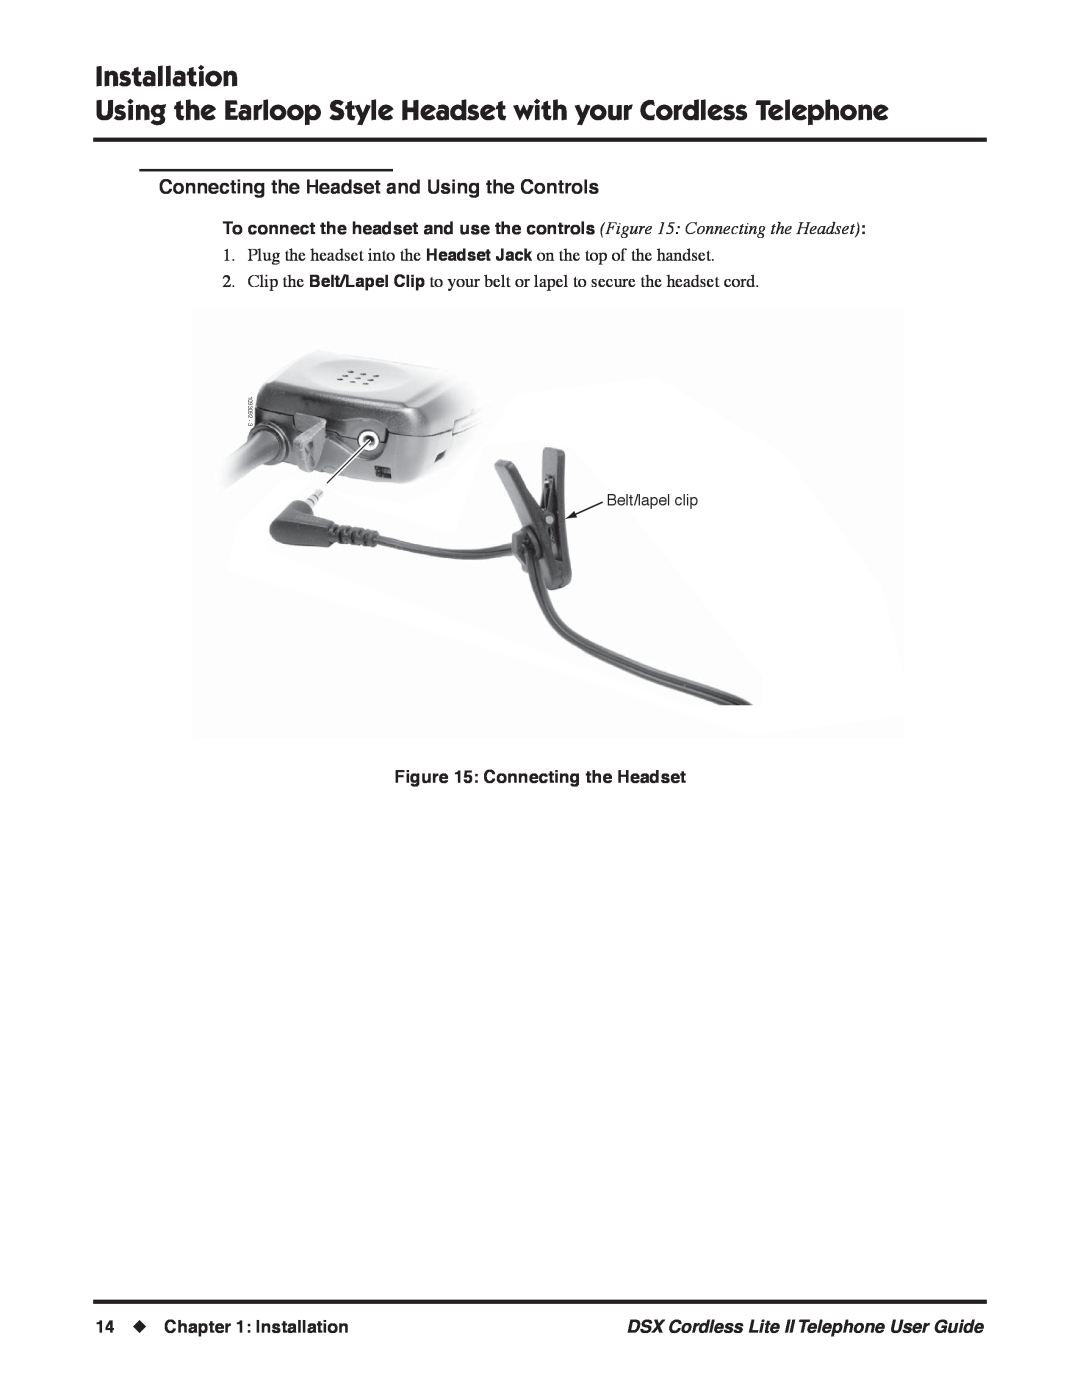 NEC P, N 1093092 Installation, Connecting the Headset and Using the Controls, DSX Cordless Lite II Telephone User Guide 